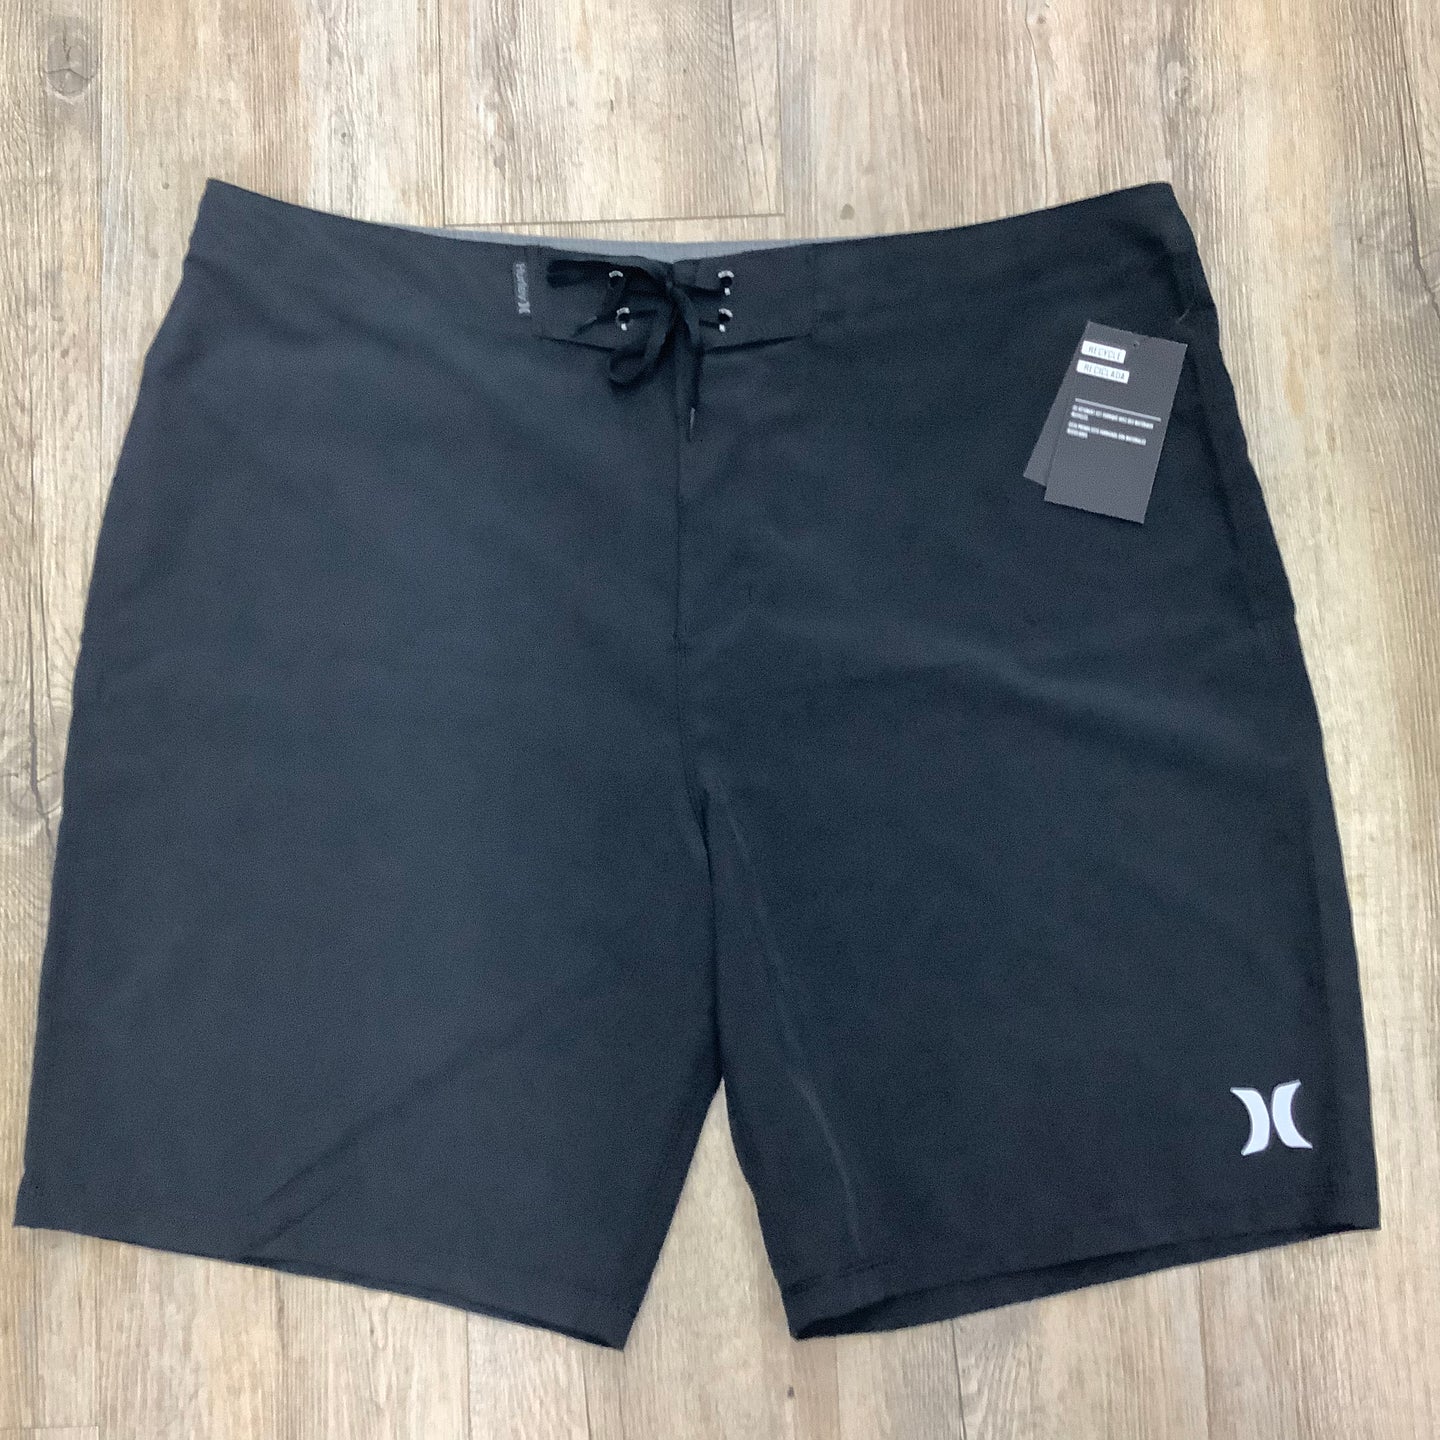 Hurley - Phantom One and Only Boardshort 20”